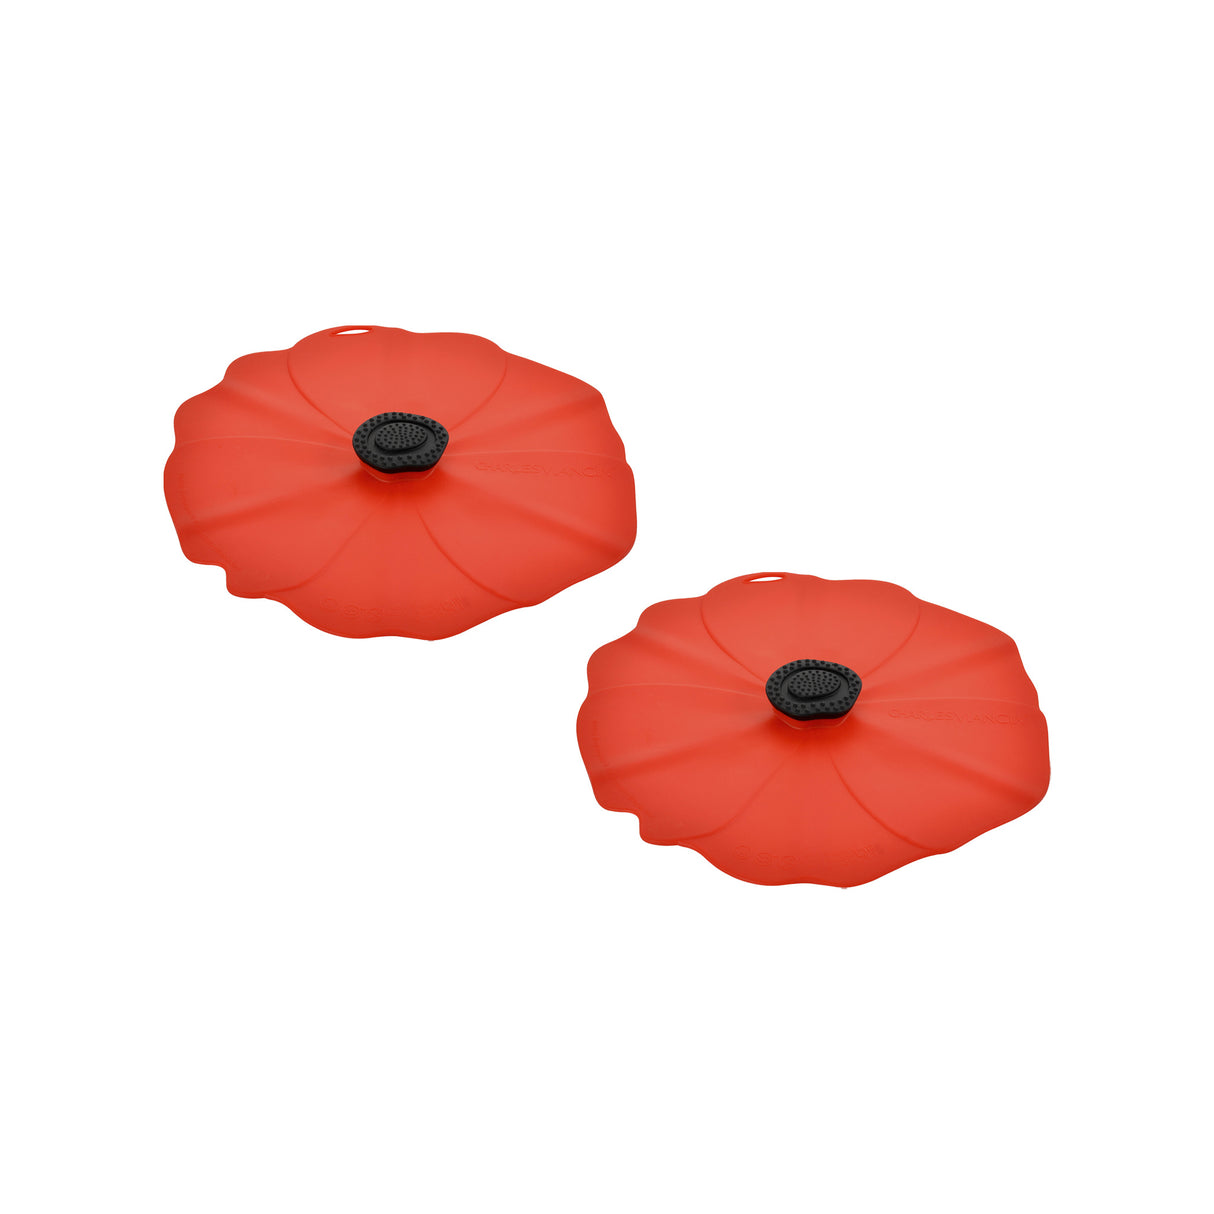 CHARLES-VIANCIN-2905-POPPY-DRINK-COVERS-4-SILICONE-3-4.jpg